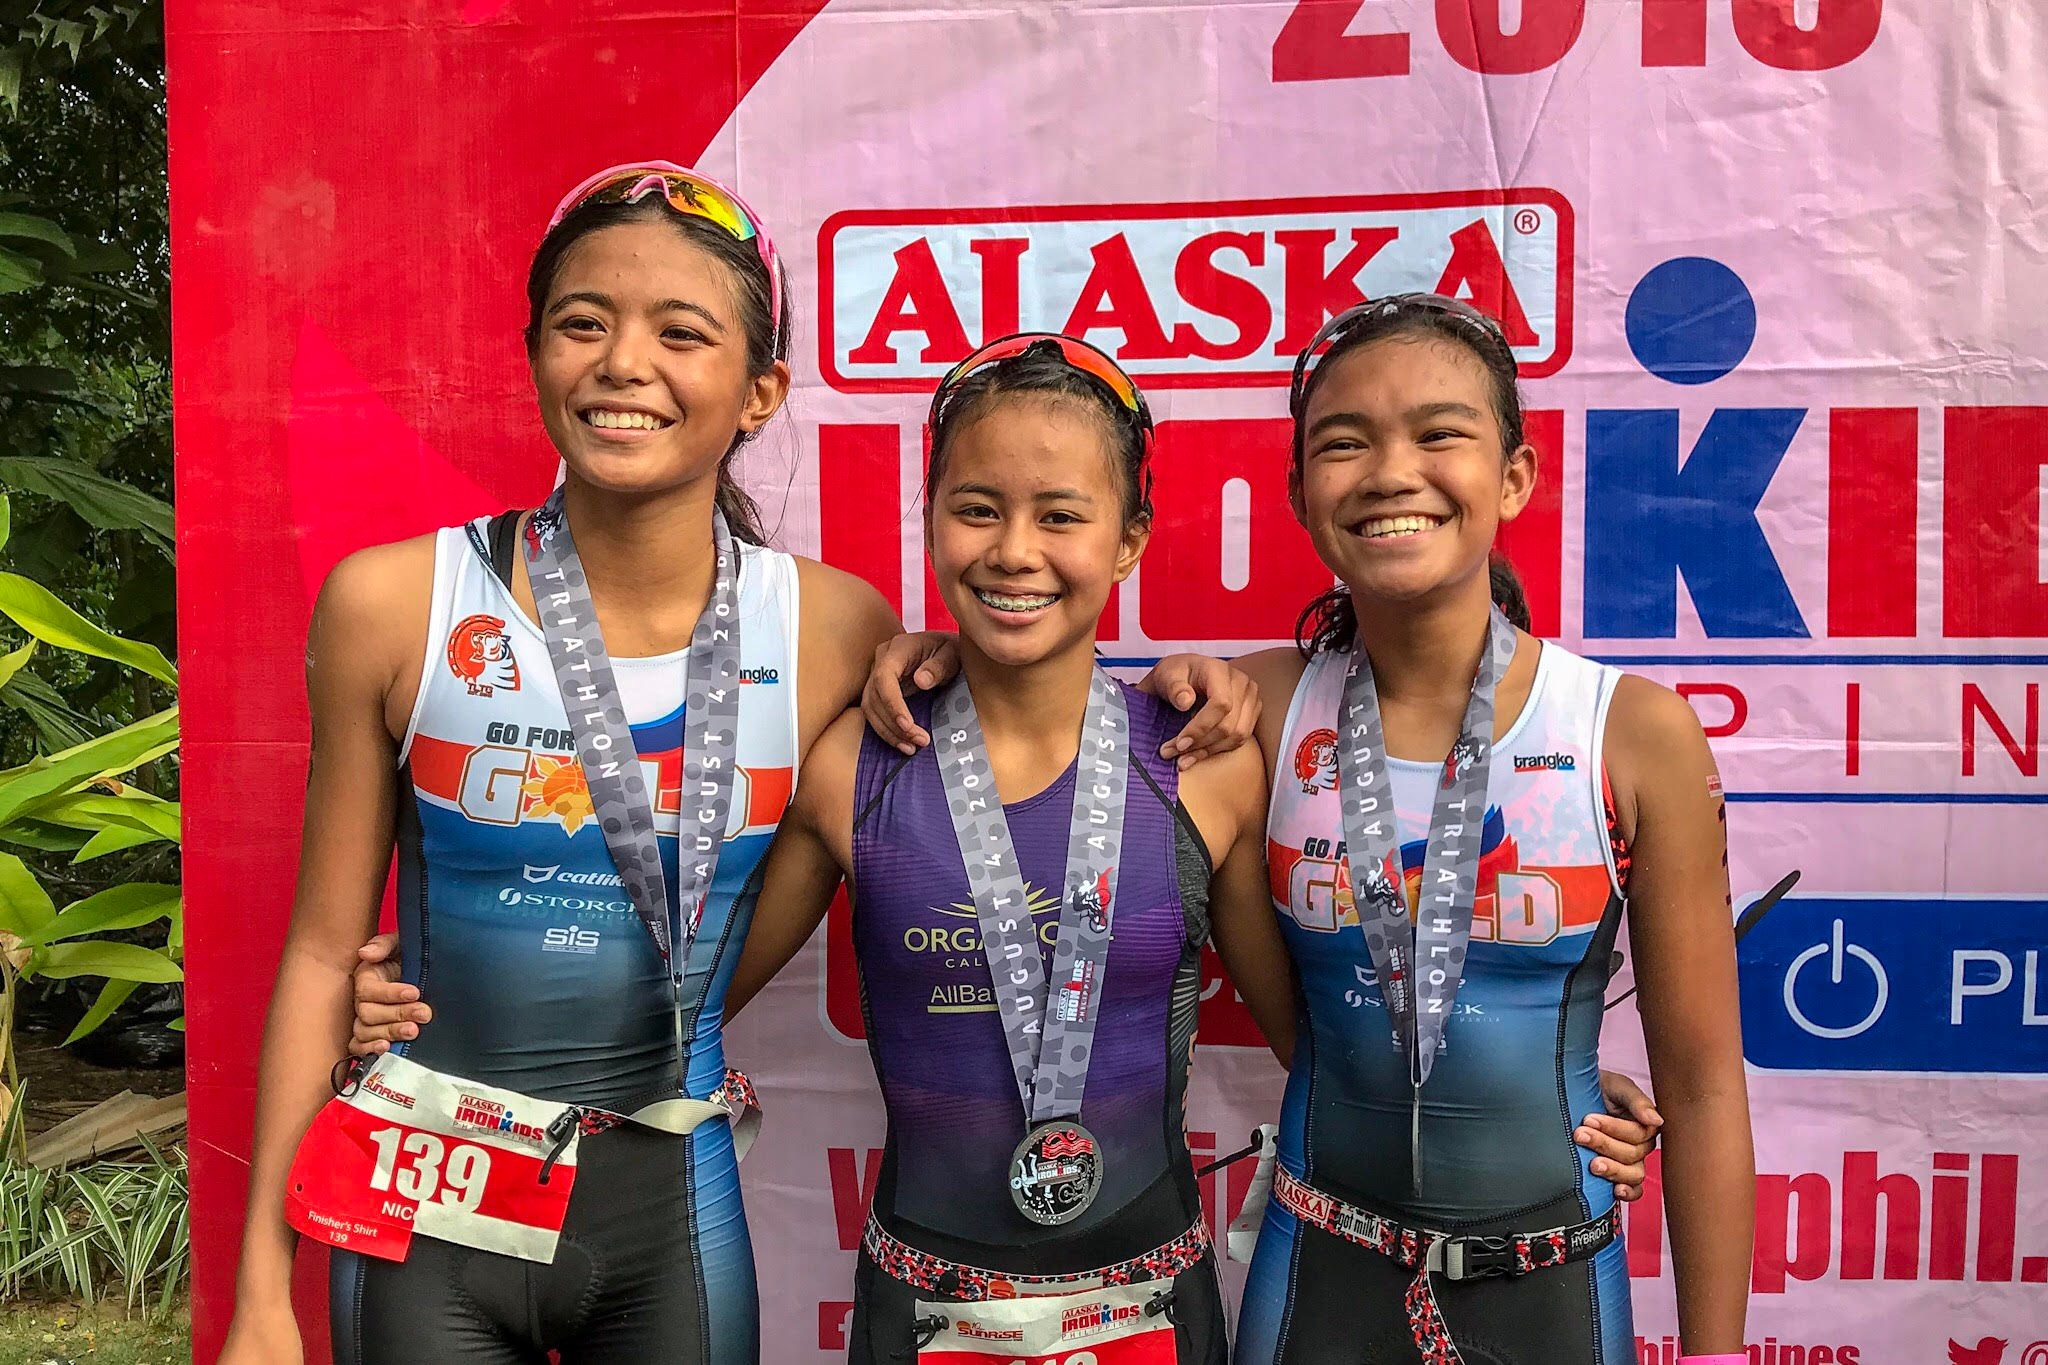 CEBUANA DOMINATION. Champion Moira Erediano (center) leads the Cebu sweep of the 13-14 girls podium with Nicole del Rosario (left) and Jeanna Canete. Photo by Beatrice Go/Rappler  